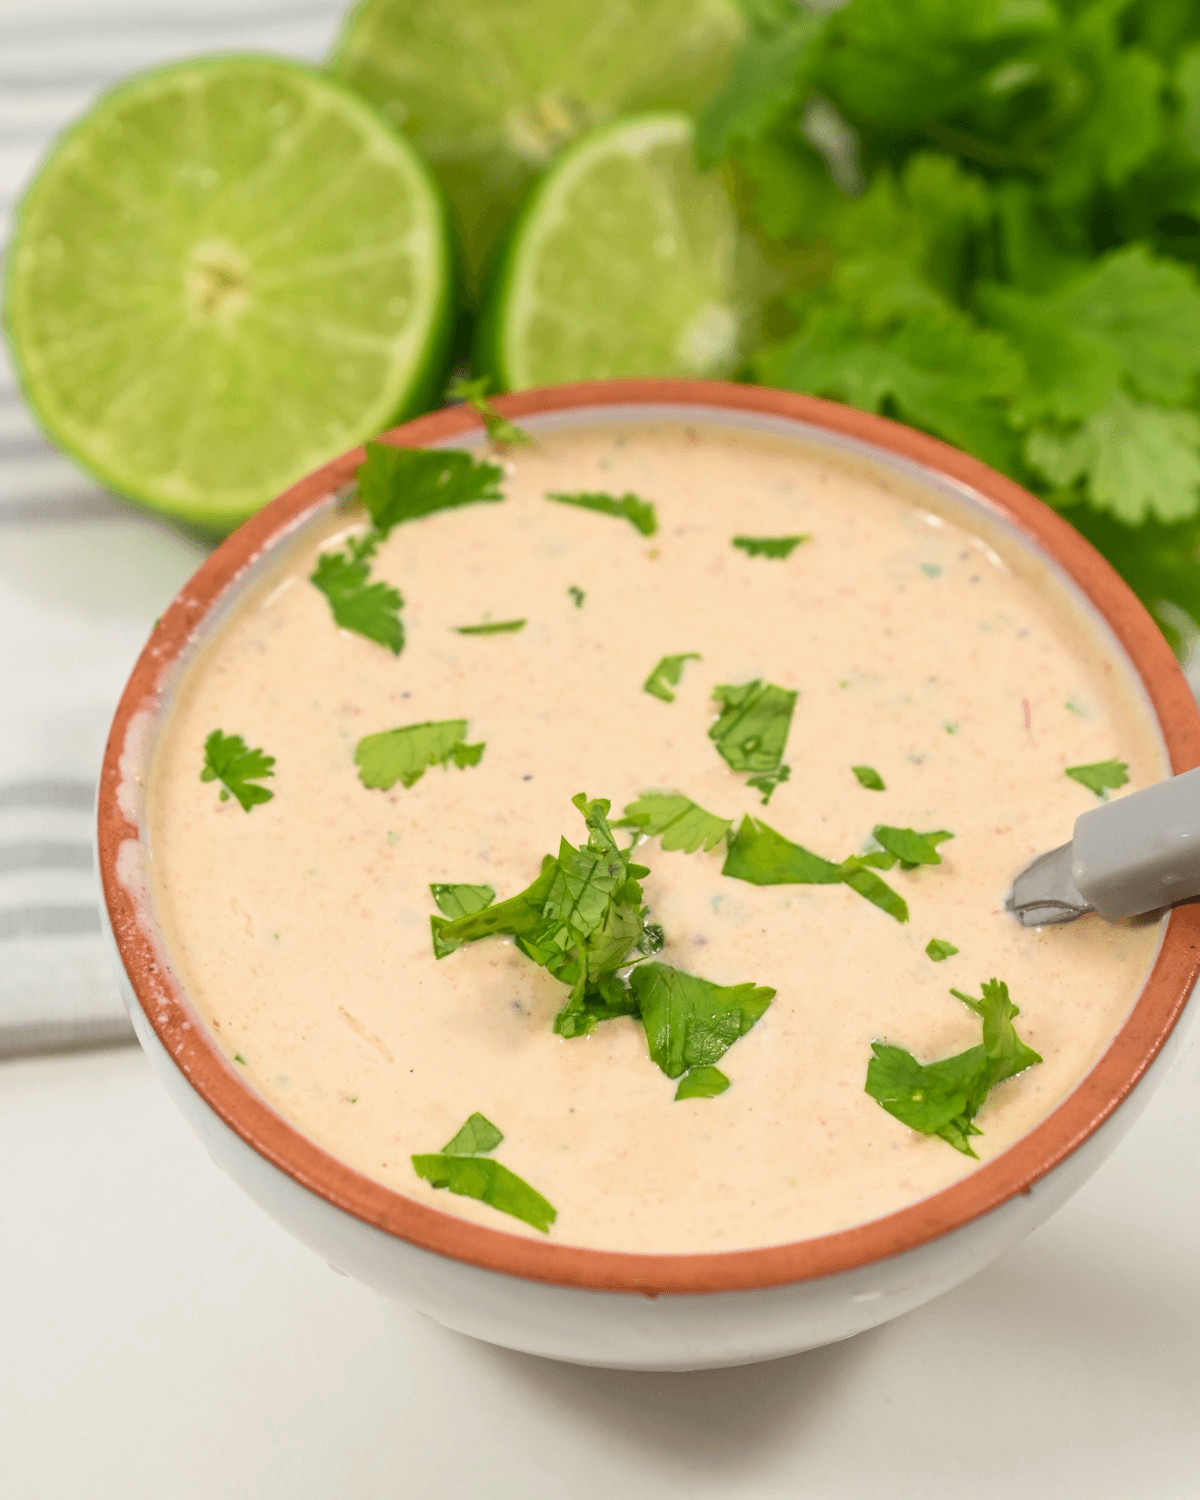 A bowl with a spoon, garnished with chopped cilantro, with fresh limes and cilantro leaves in the background.